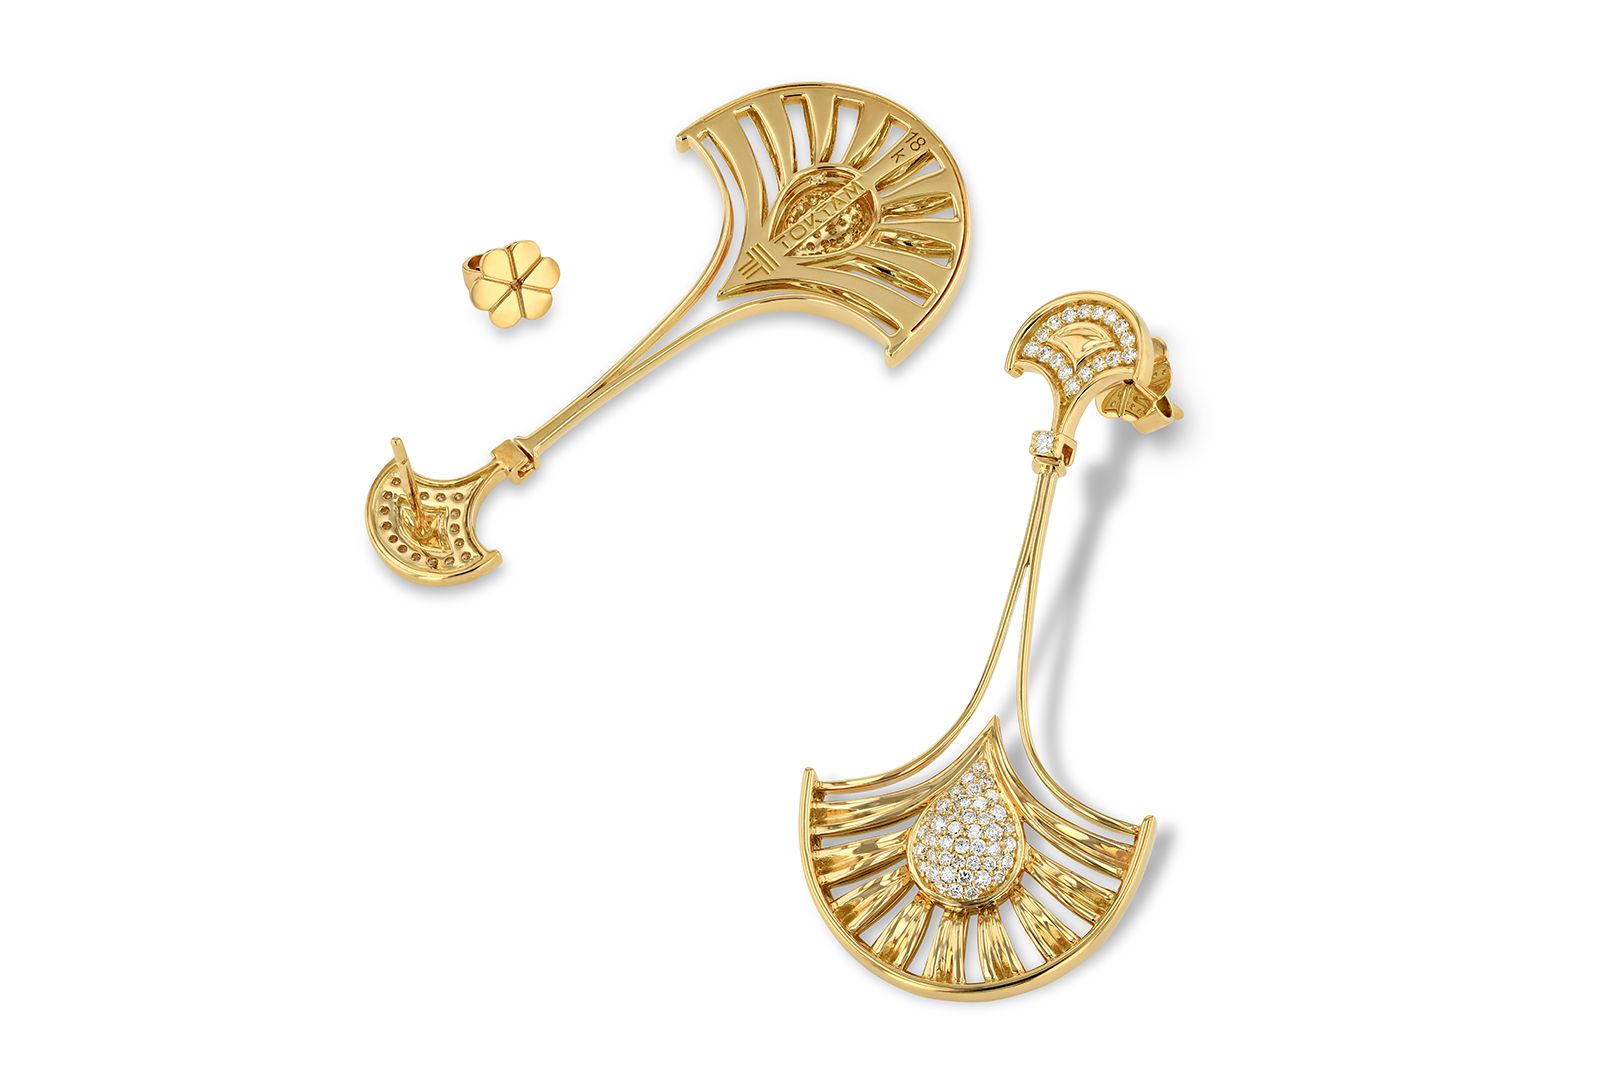 TOKTAM Pendulum earrings with diamonds from the Art Deco collection